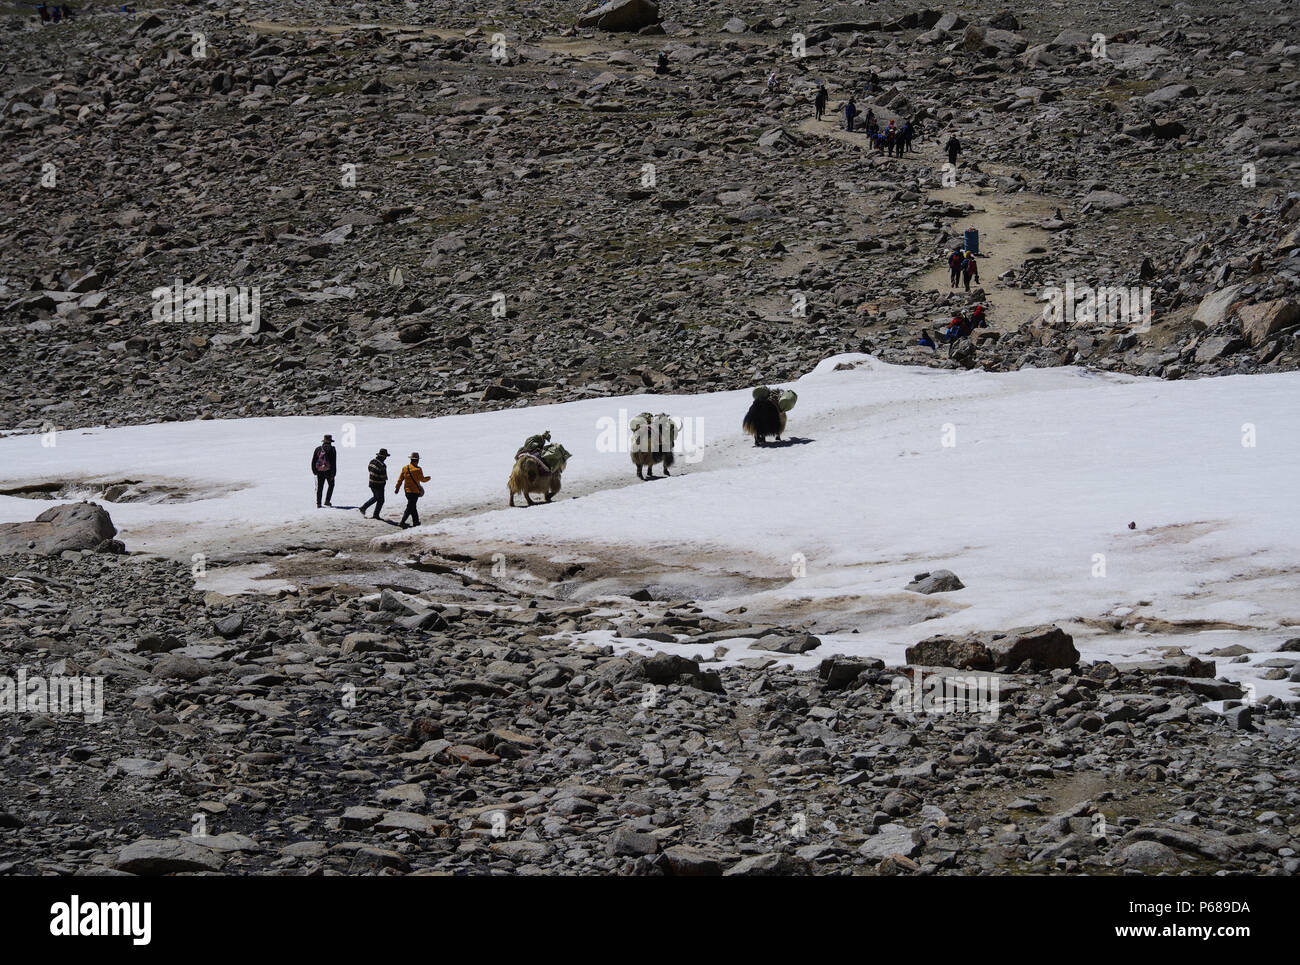 Ali, China's Tibet Autonomous Region. 25th June, 2018. Indian pilgrims travel to Mount Kangrinboqe, a sacred Hindu and Buddhist site, with assistance of a yak transport team, in Ali Prefecture, southwest China's Tibet Autonomous Region, June 25, 2018. This year, the Nathu La Pass is expected to see about 500 officially-organized pilgrims from India who will make the 2,874-km pilgrimage, according to Yang Zhigang, deputy director of the office of foreign affairs and overseas Chinese affairs in Xigaze City. Credit: Liu Dongjun/Xinhua/Alamy Live News Stock Photo